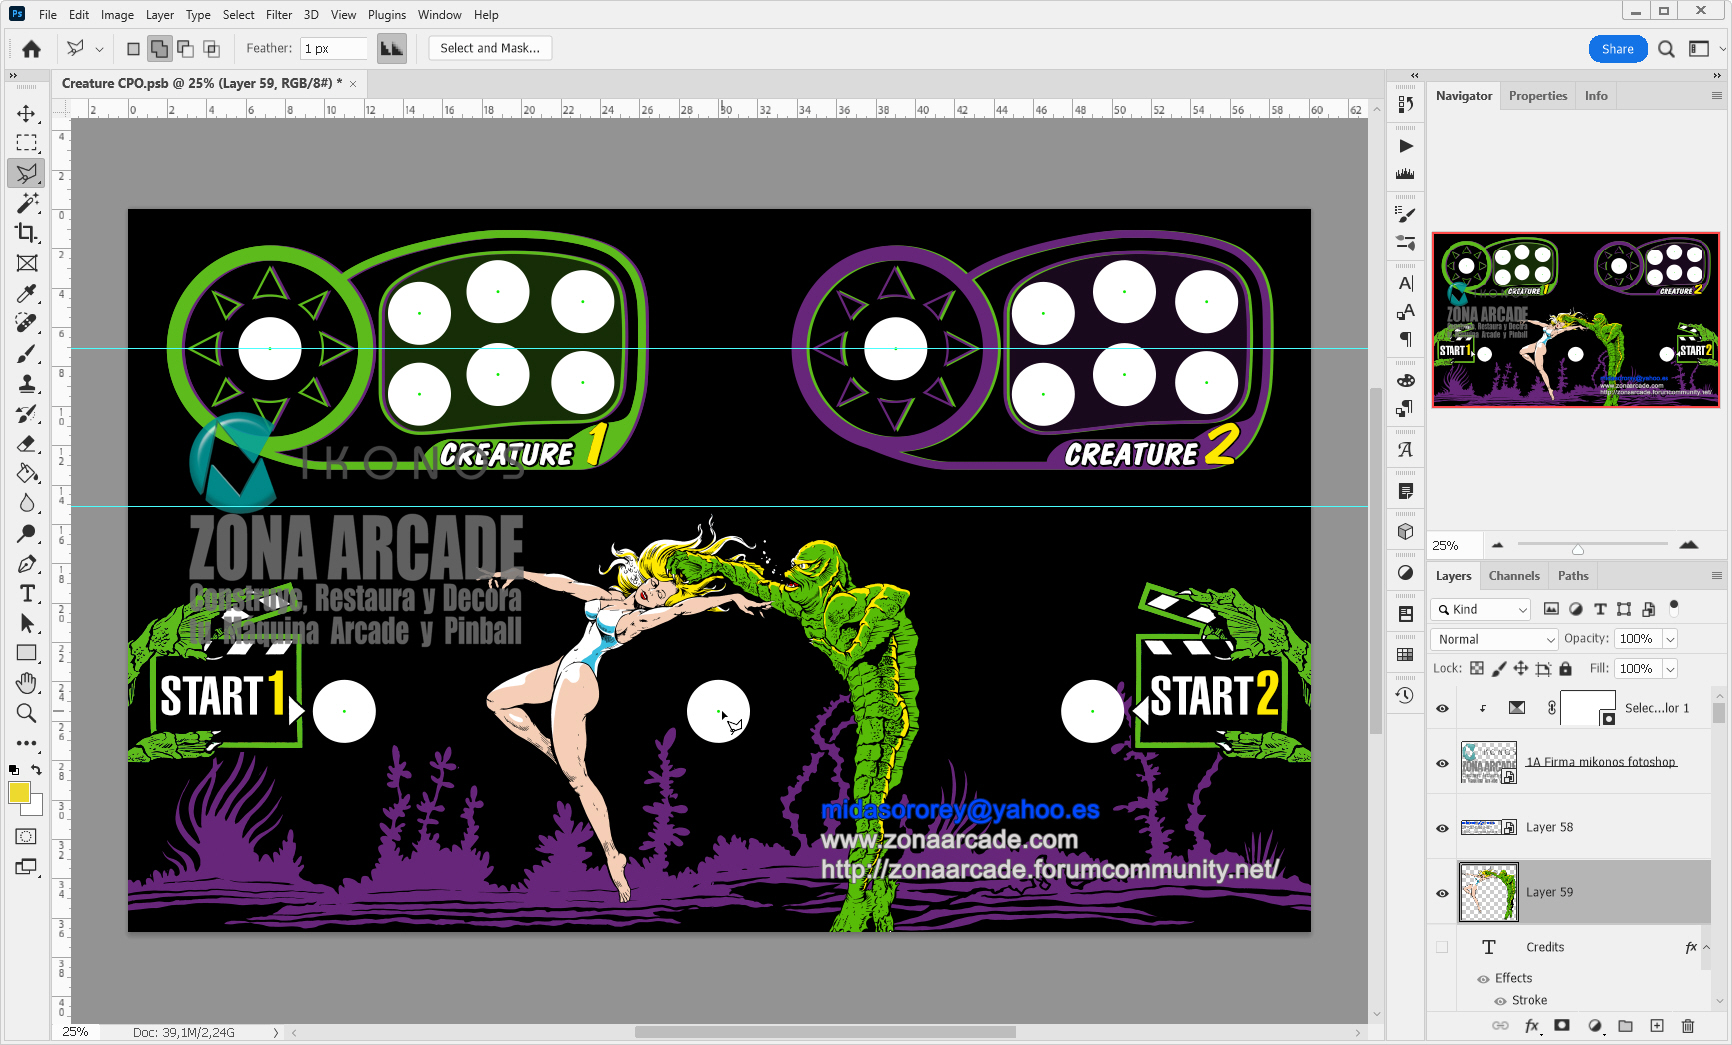 Creature-From-the-Black-Lagoon-Arcade-Cabinet-Control-Panel-Overlay-Designed-Mikonos5